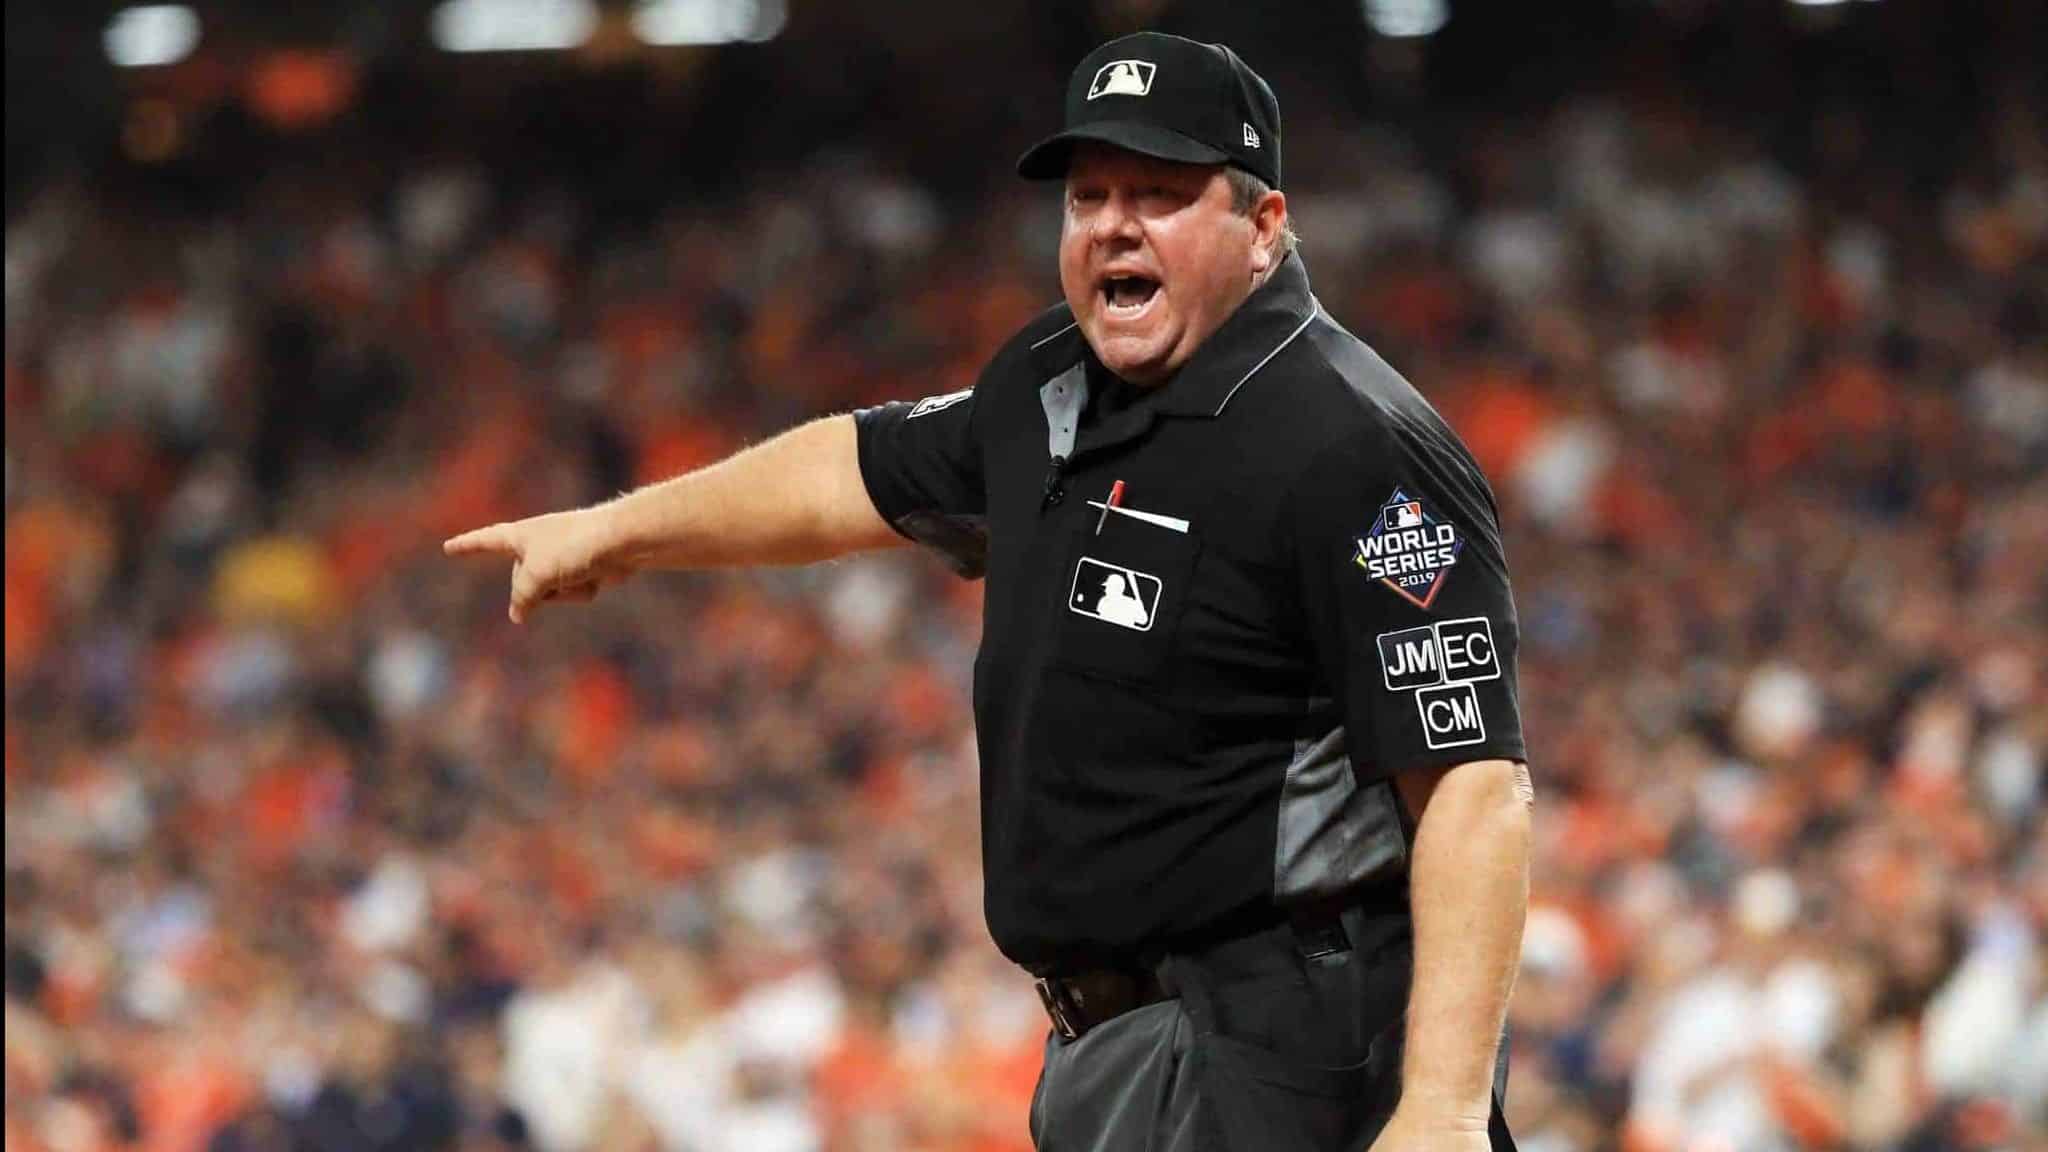 HOUSTON, TEXAS - OCTOBER 29: umpire Sam Holbrook #34 reacts after making a runner interface call on Trea Turner (not pictured) of the Washington Nationals during the seventh inning in Game Six of the 2019 World Series between the Houston Astros and the Washington Nationals at Minute Maid Park on October 29, 2019 in Houston, Texas.